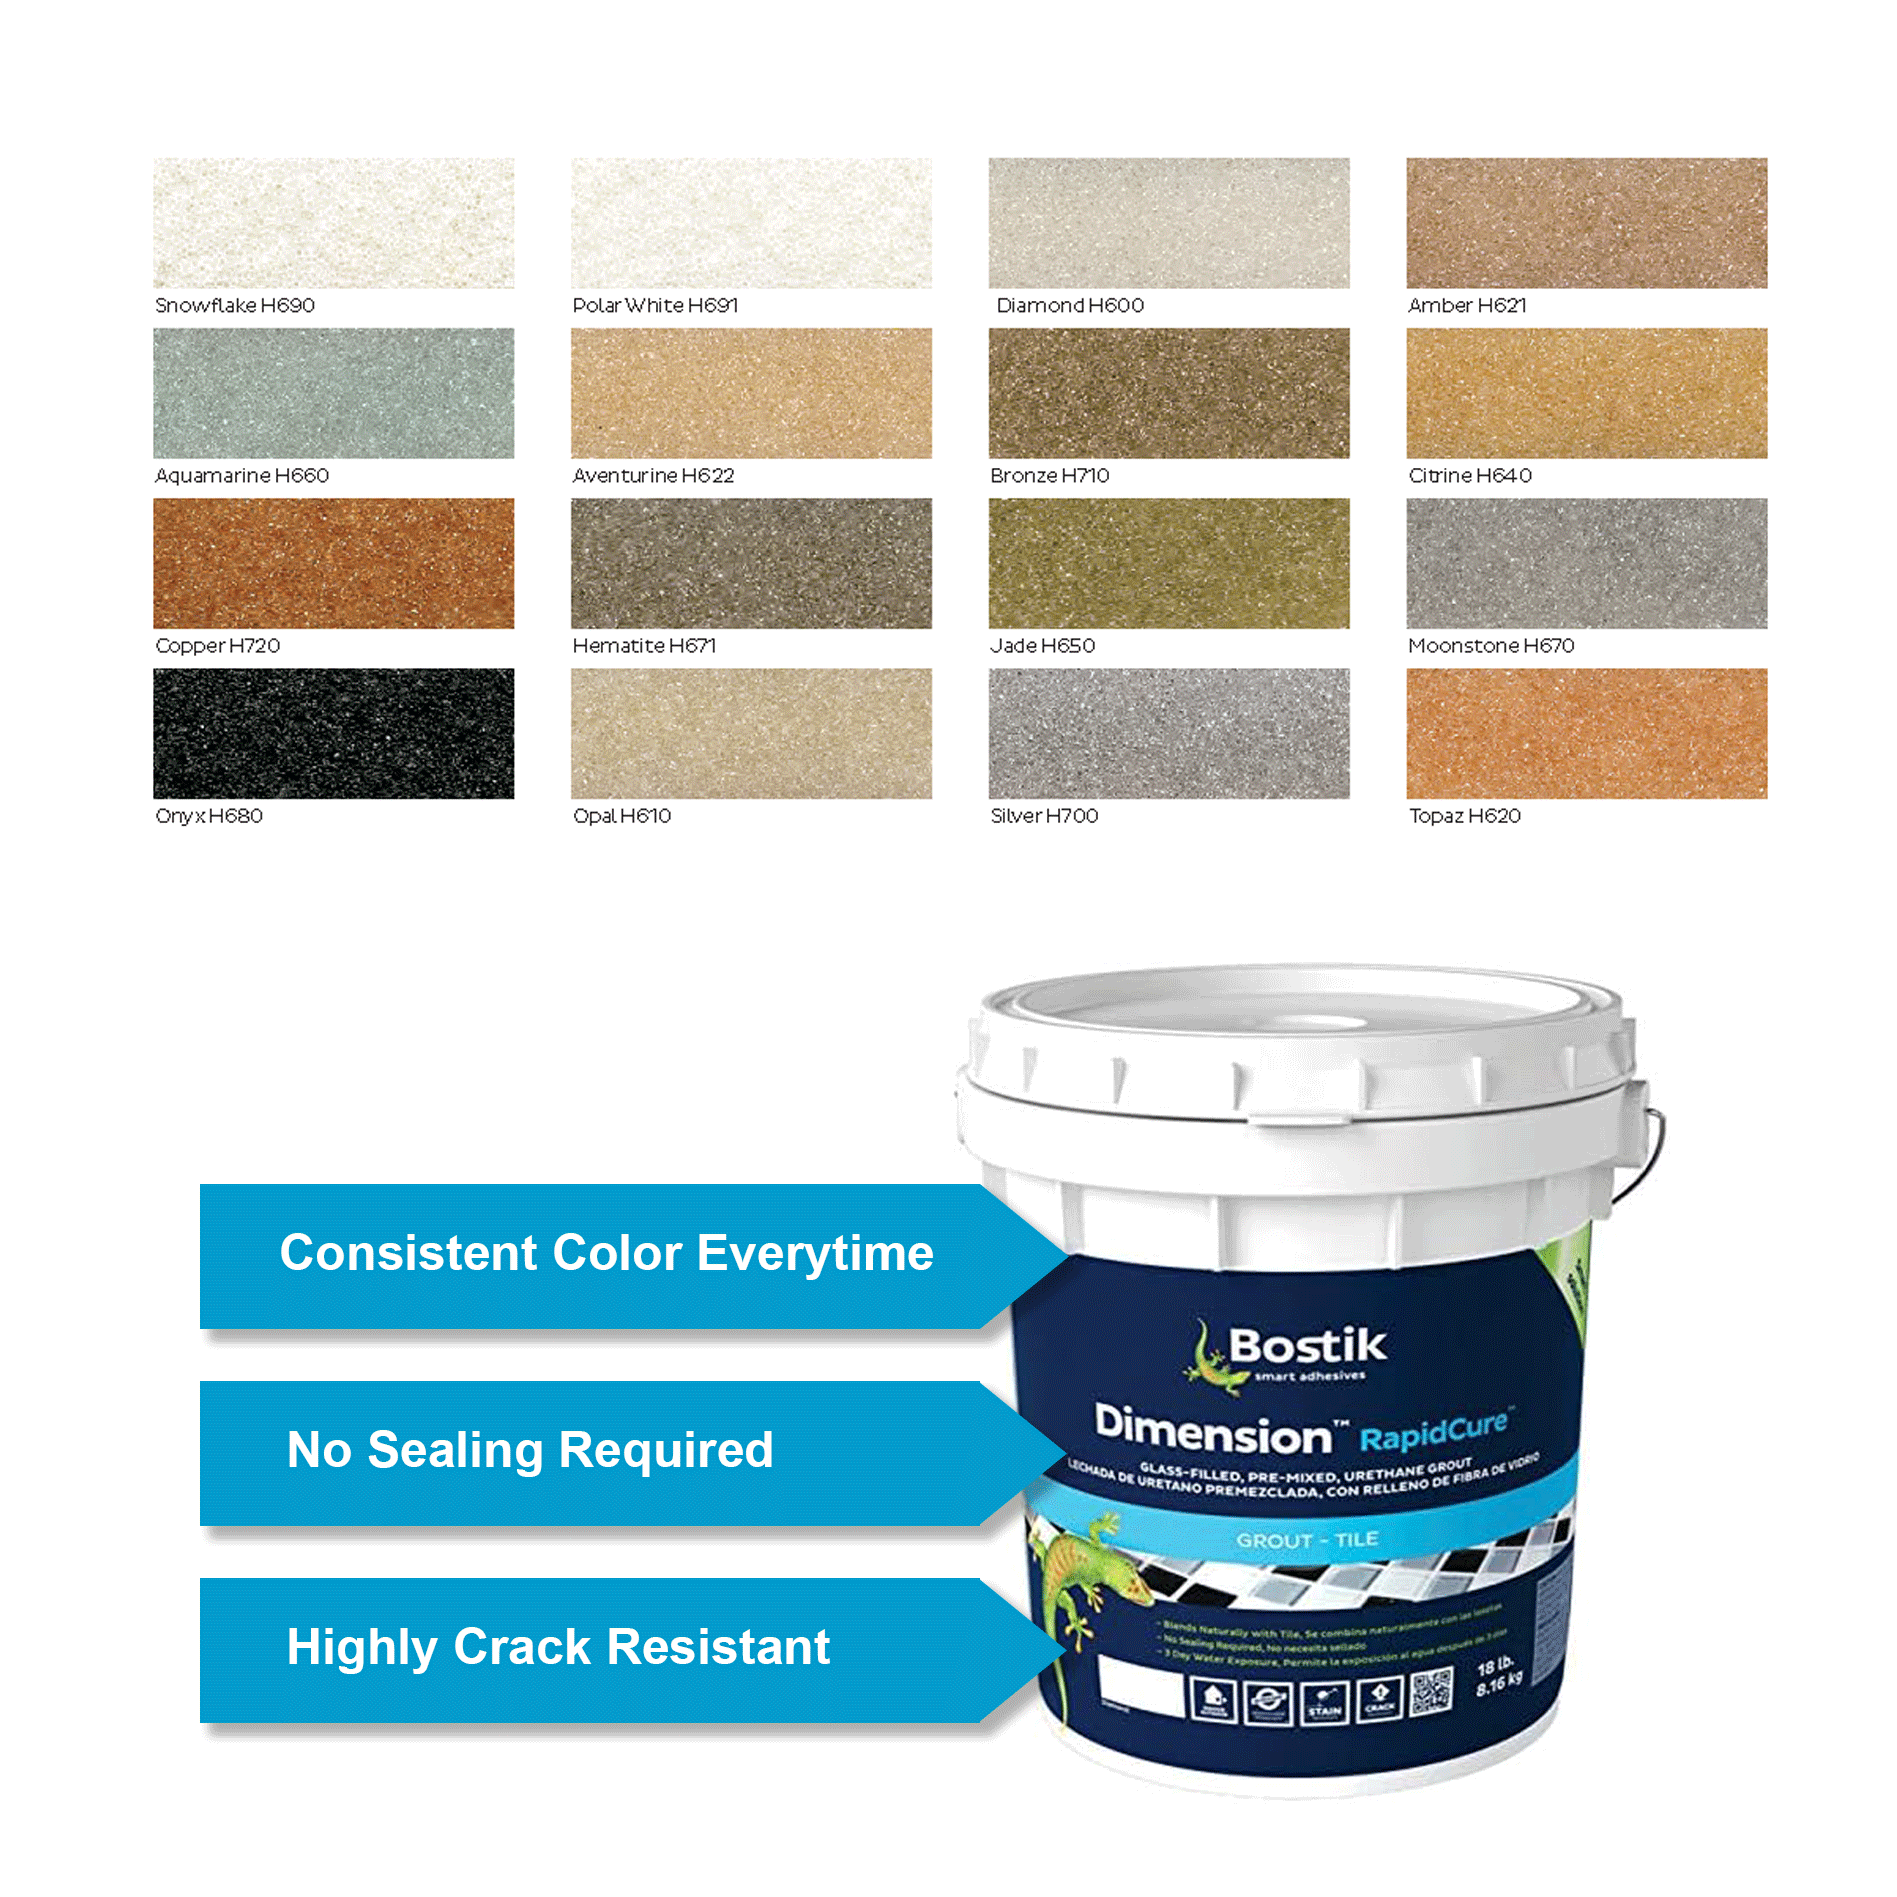 Dimension® RapidCure grout in Rockville from Aladdin Carpet and Floors